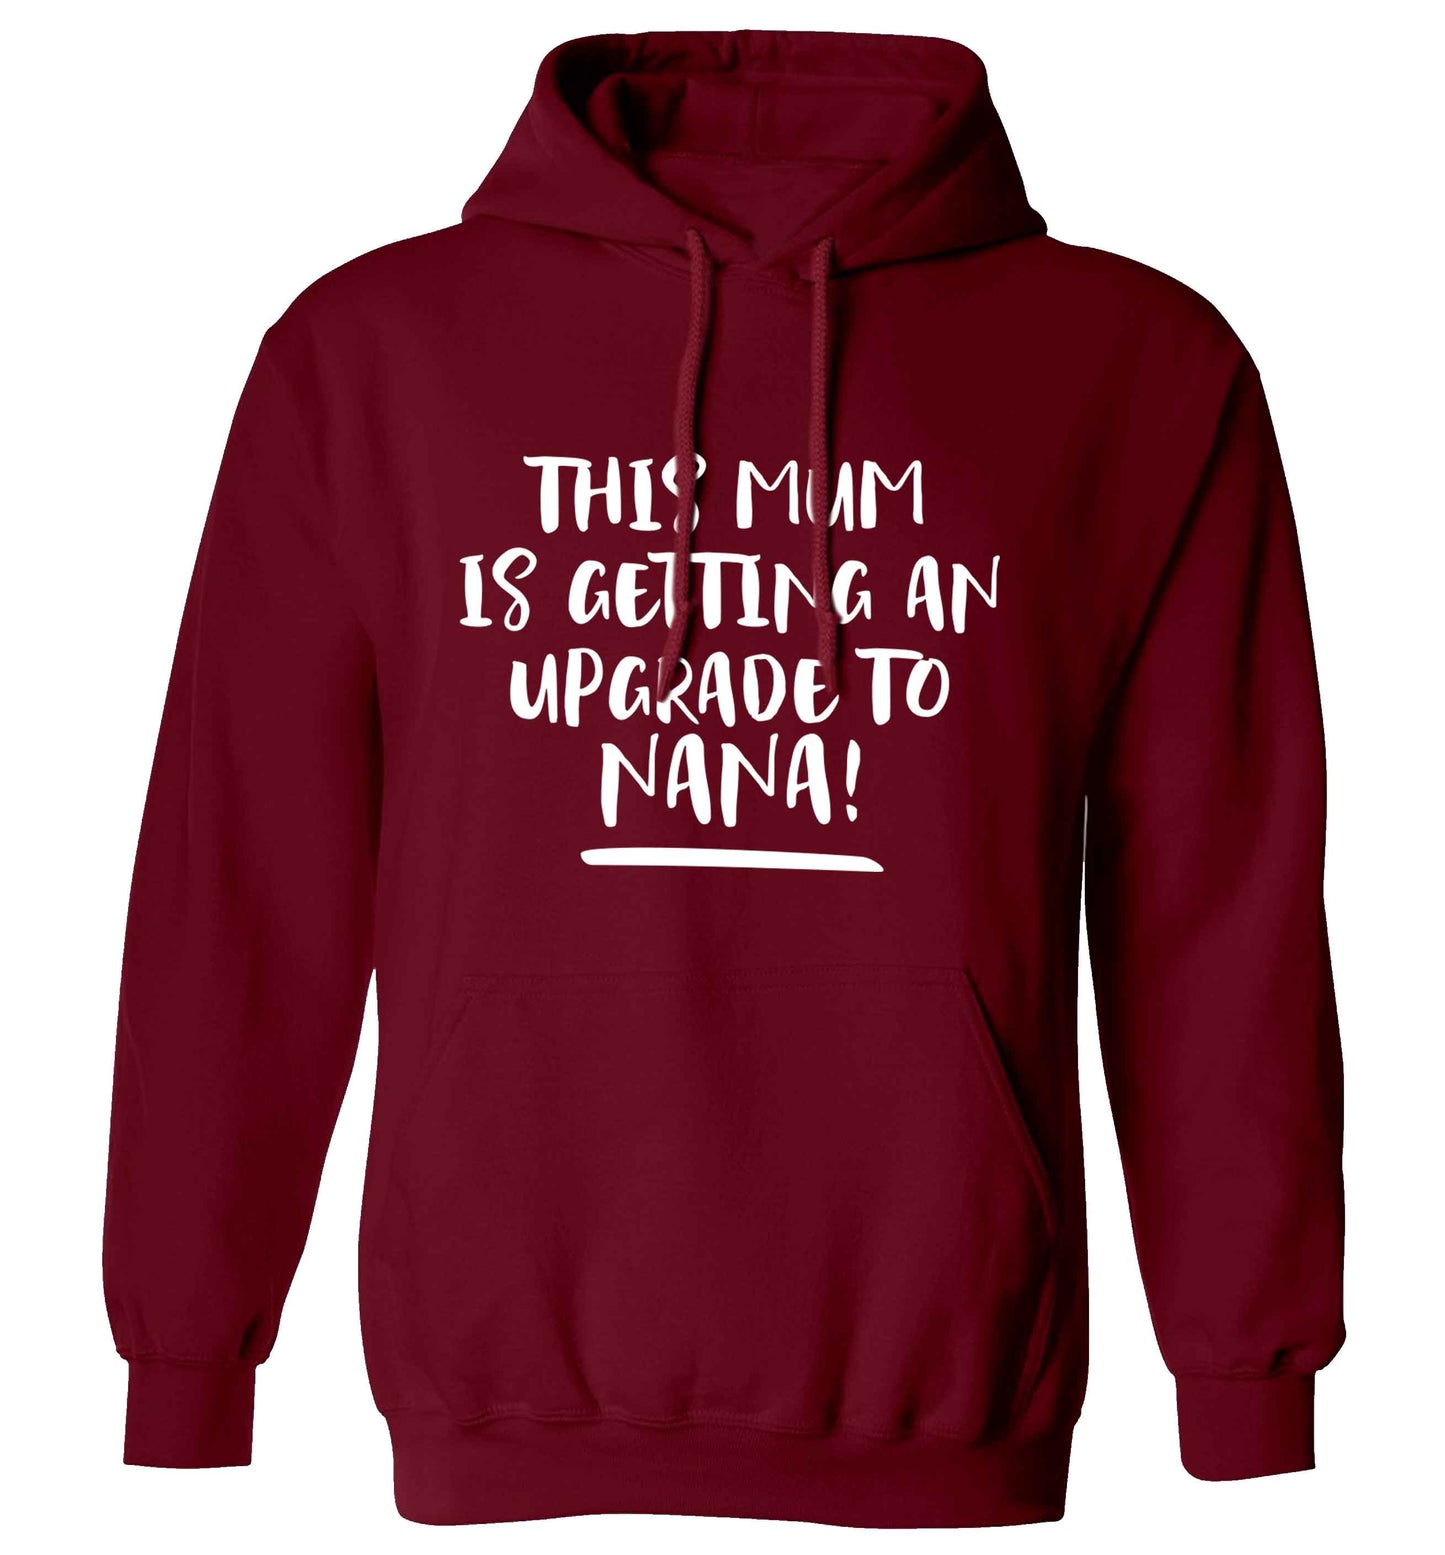 This mum is getting an upgrade to nana! adults unisex maroon hoodie 2XL